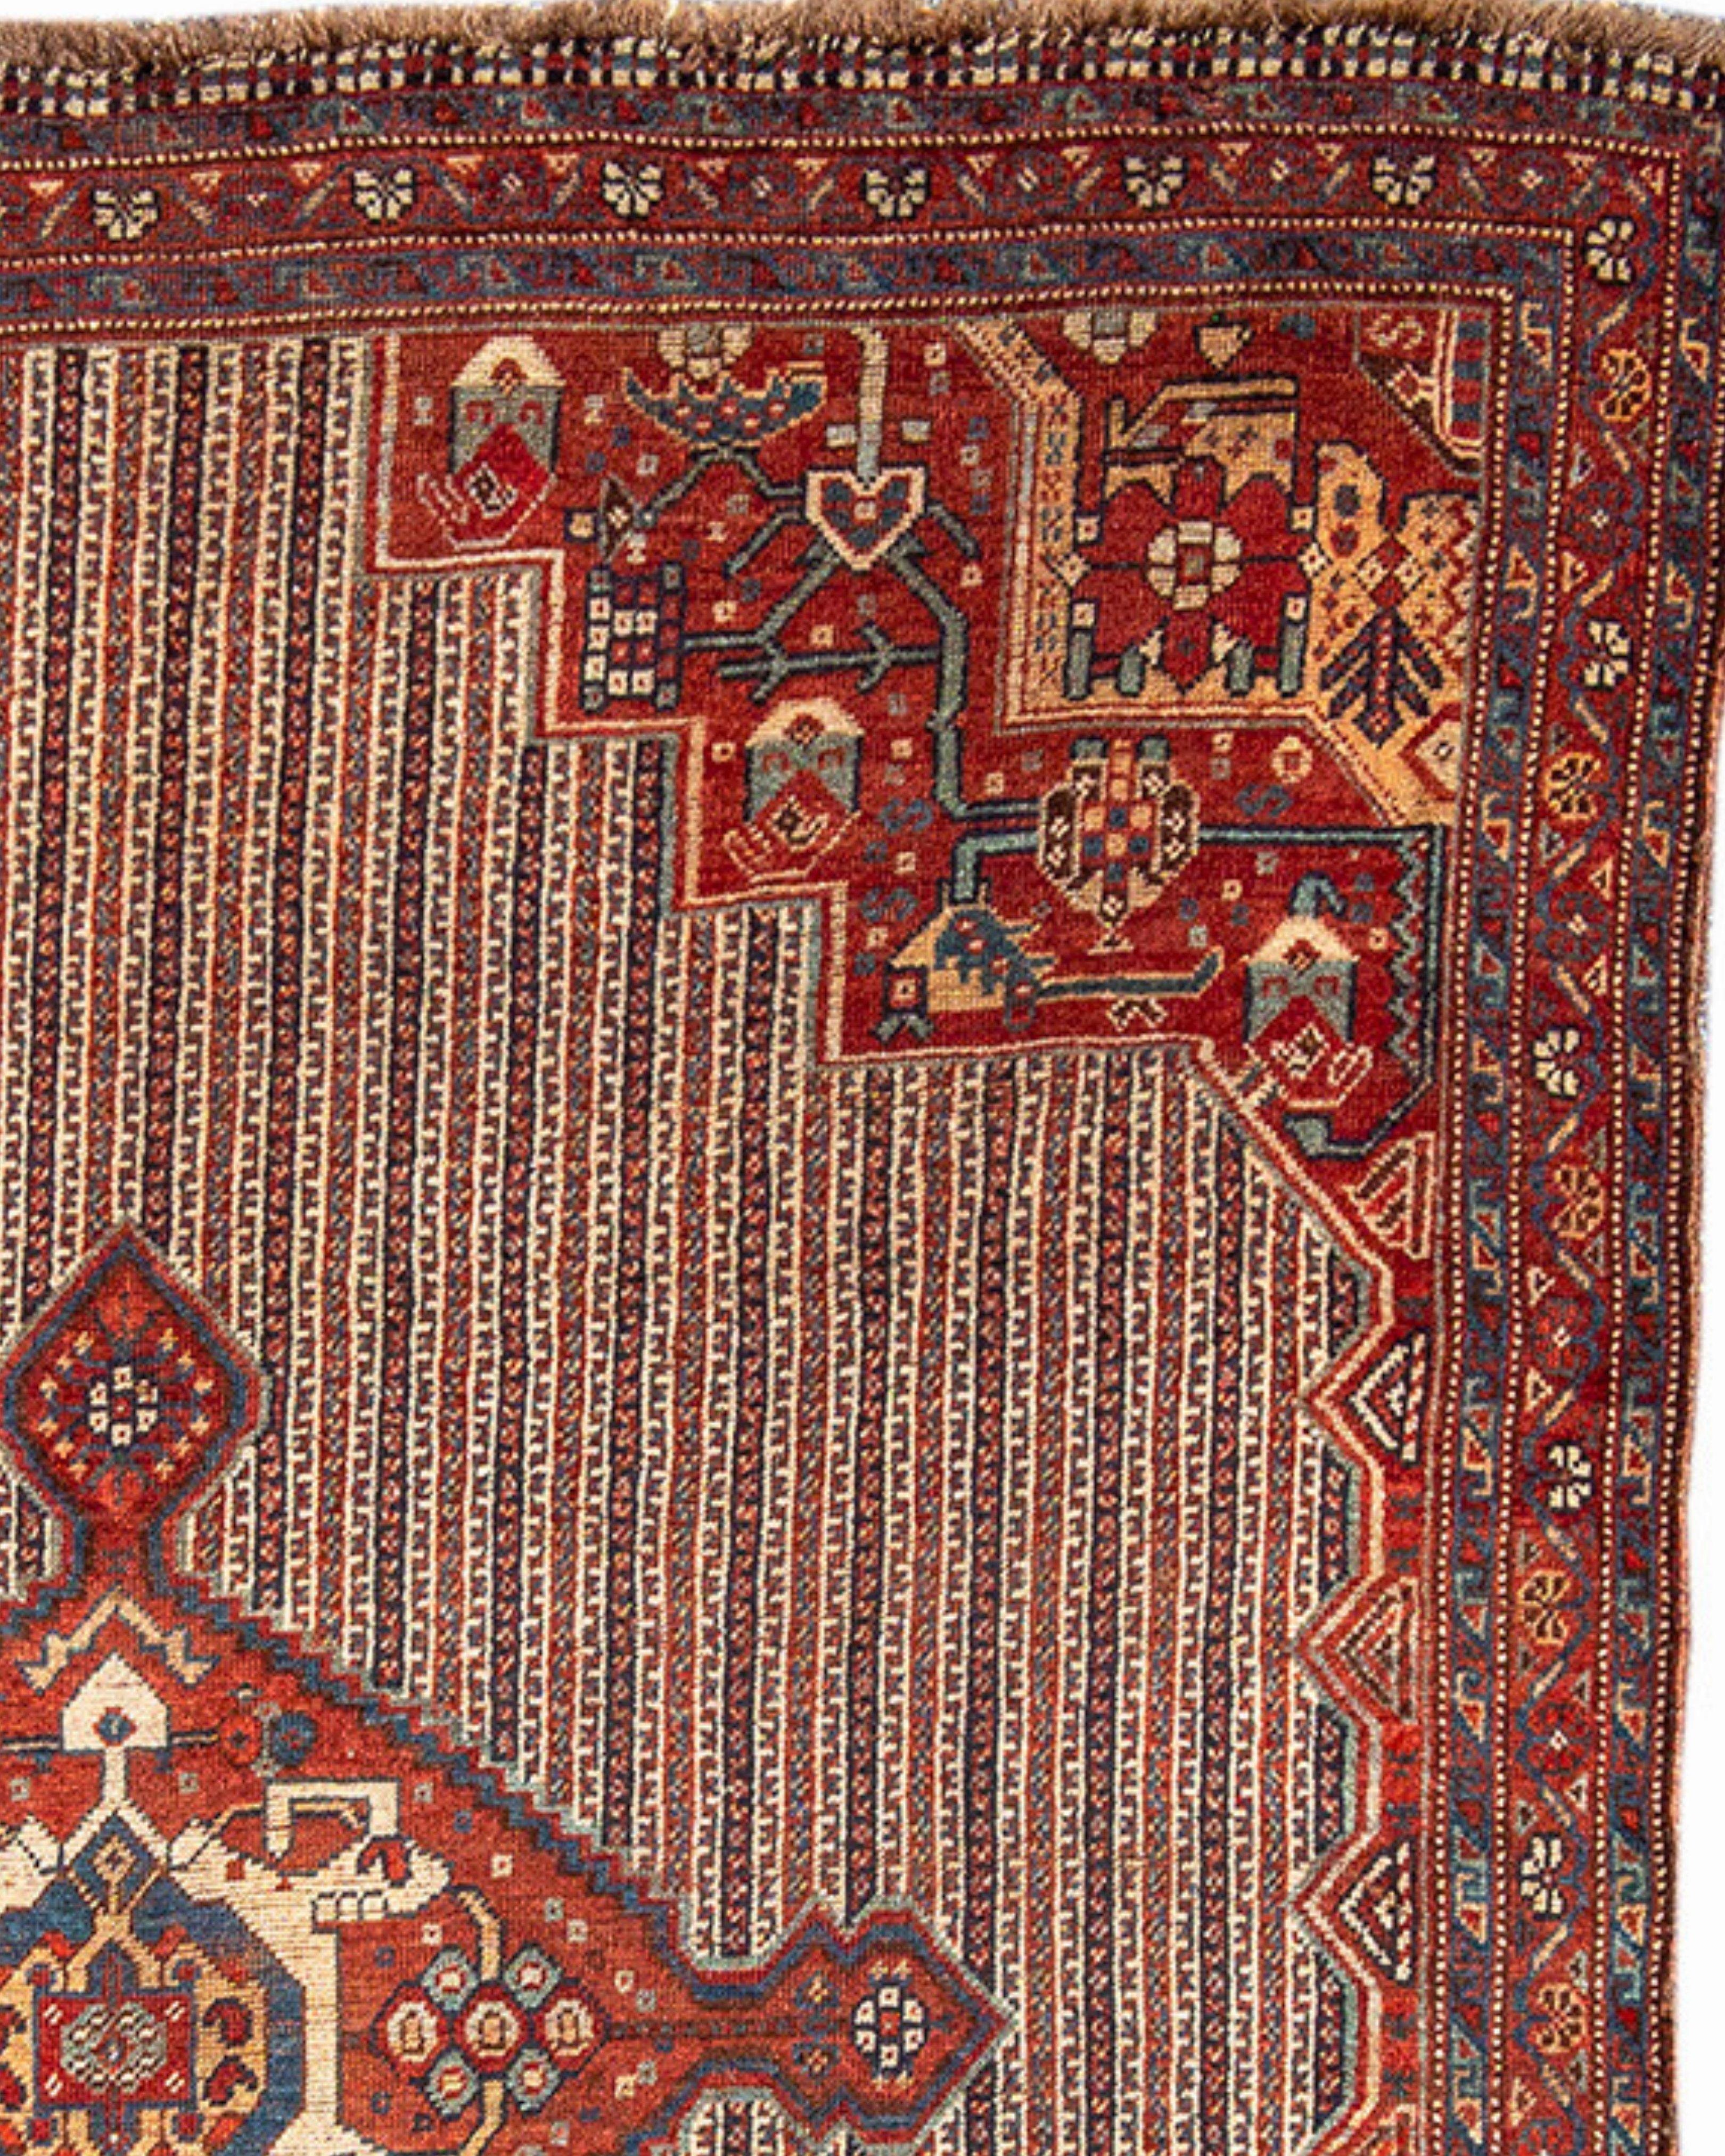 Antique Persian Khamseh Rug, 19th Century

Very good condition with slight wear.

Additional Information:
Dimensions: 4'6